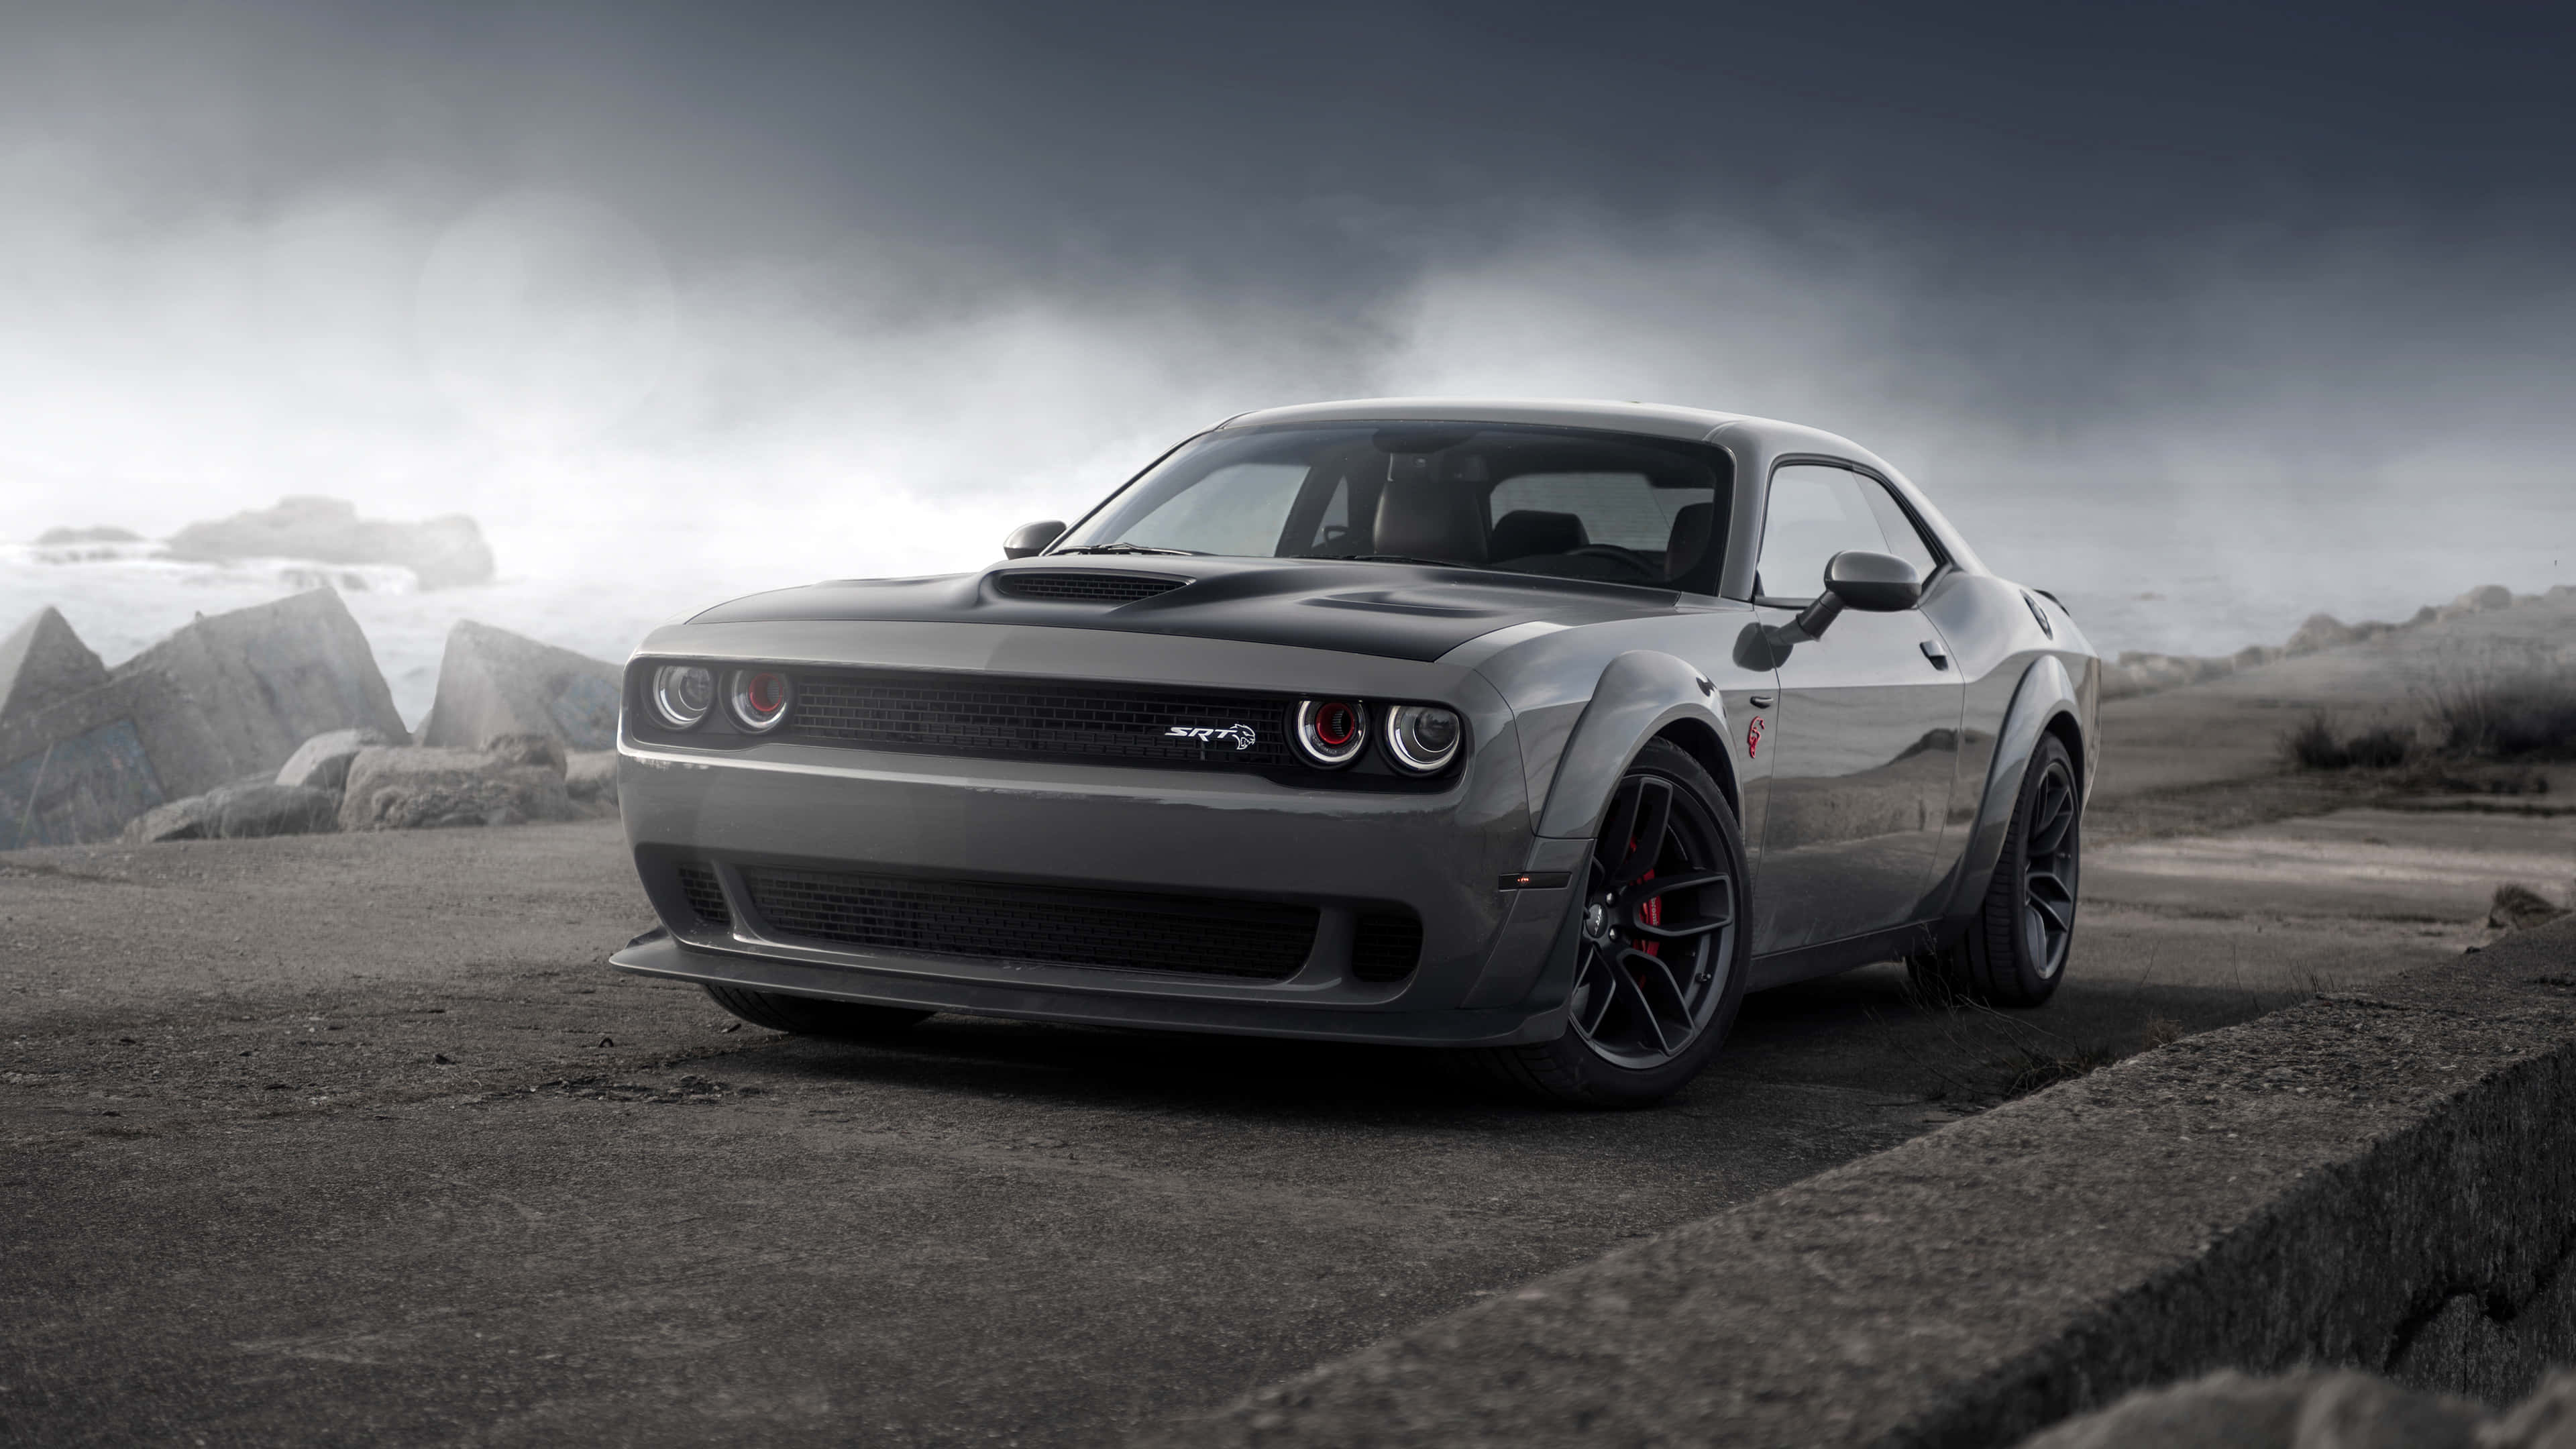 Take a ride in this powerful Dodge Challenger 4k car Wallpaper